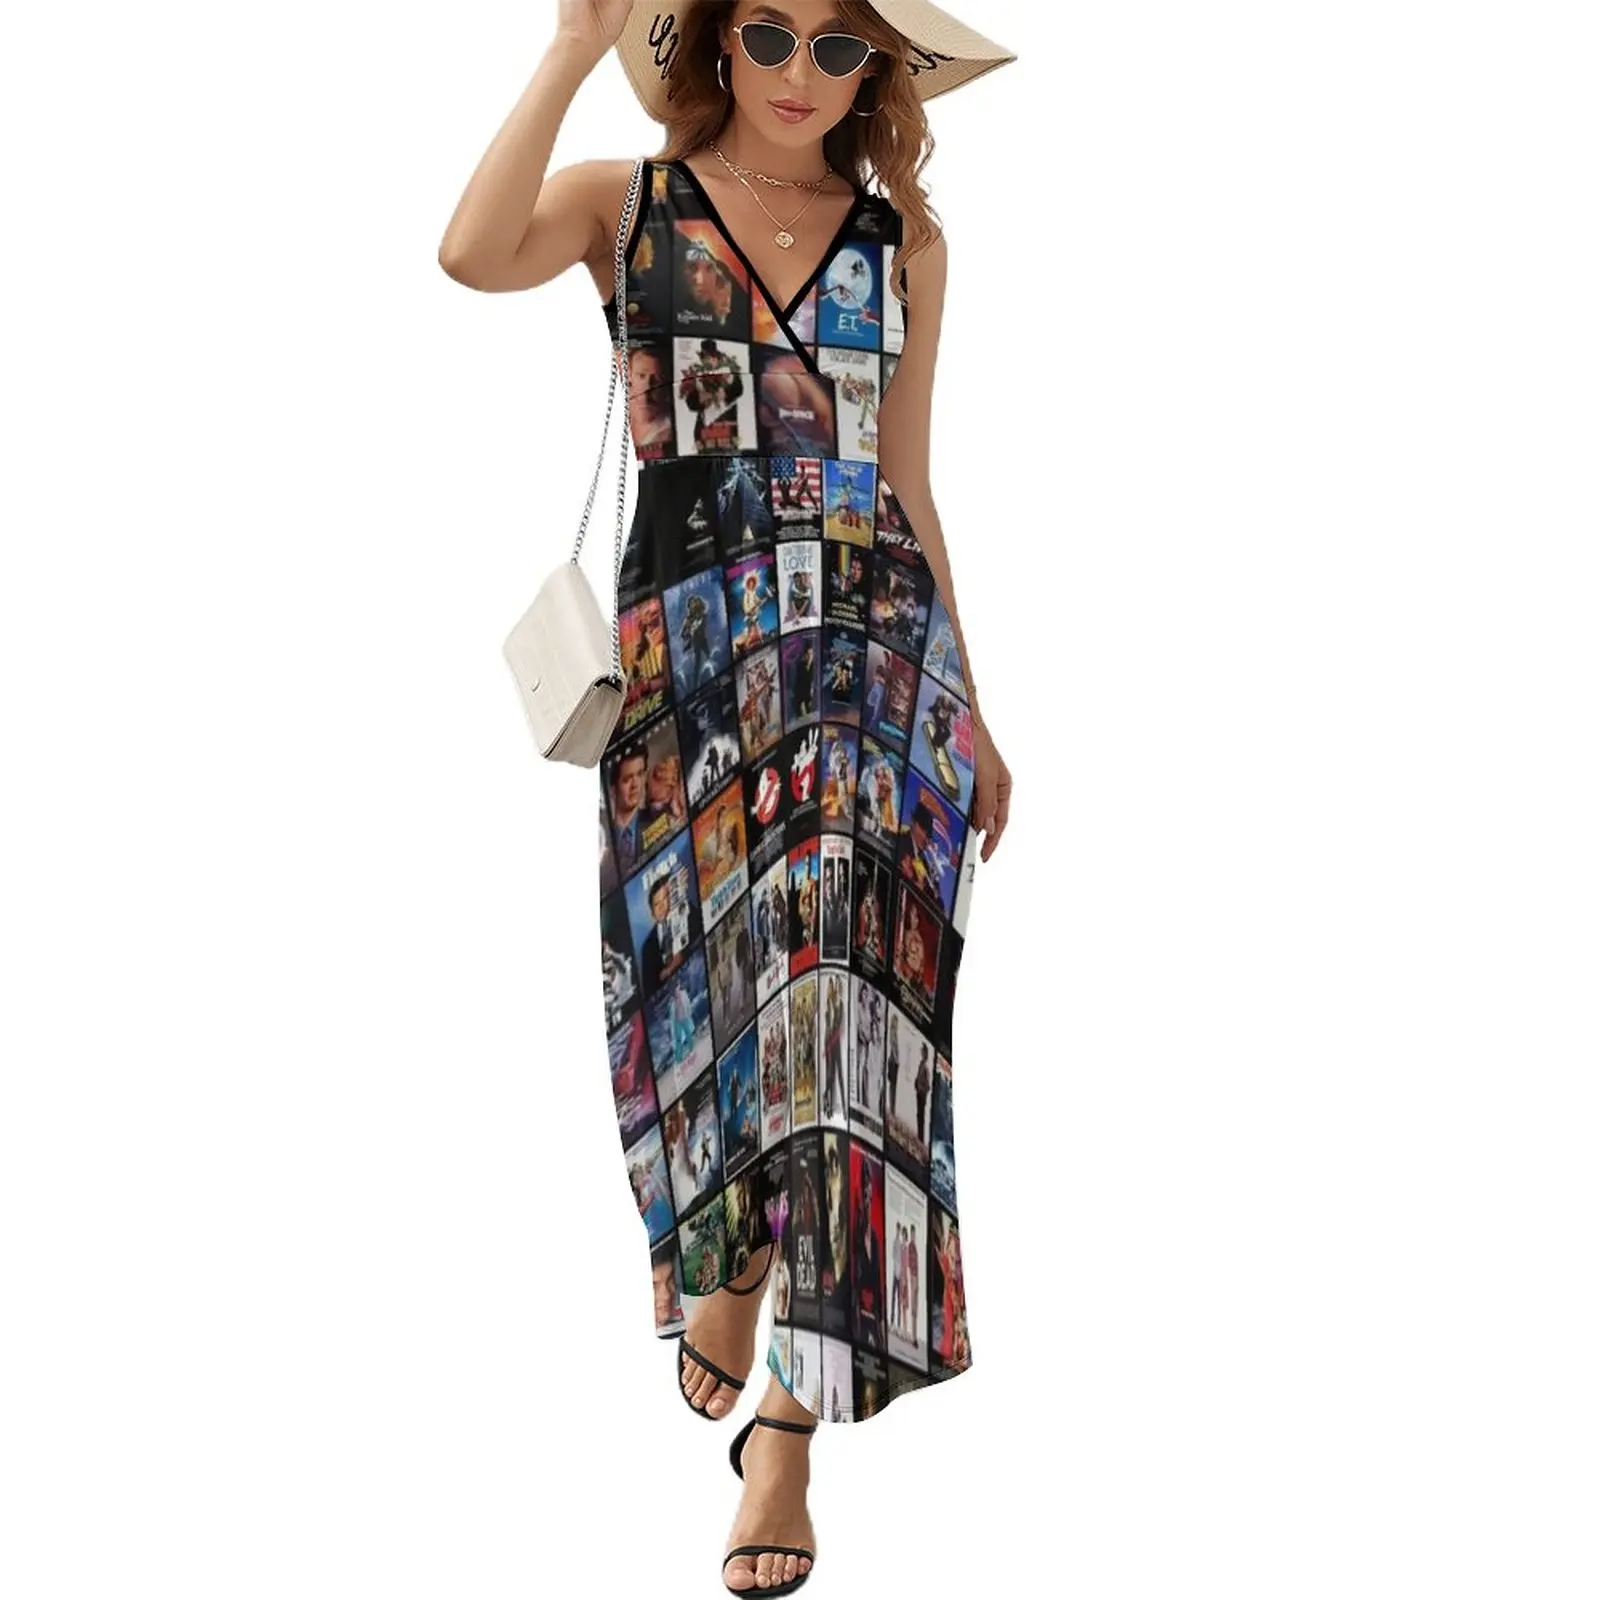 

80's movies collage | the best of the best Sleeveless Dress women's fashion dresses loose women's dress